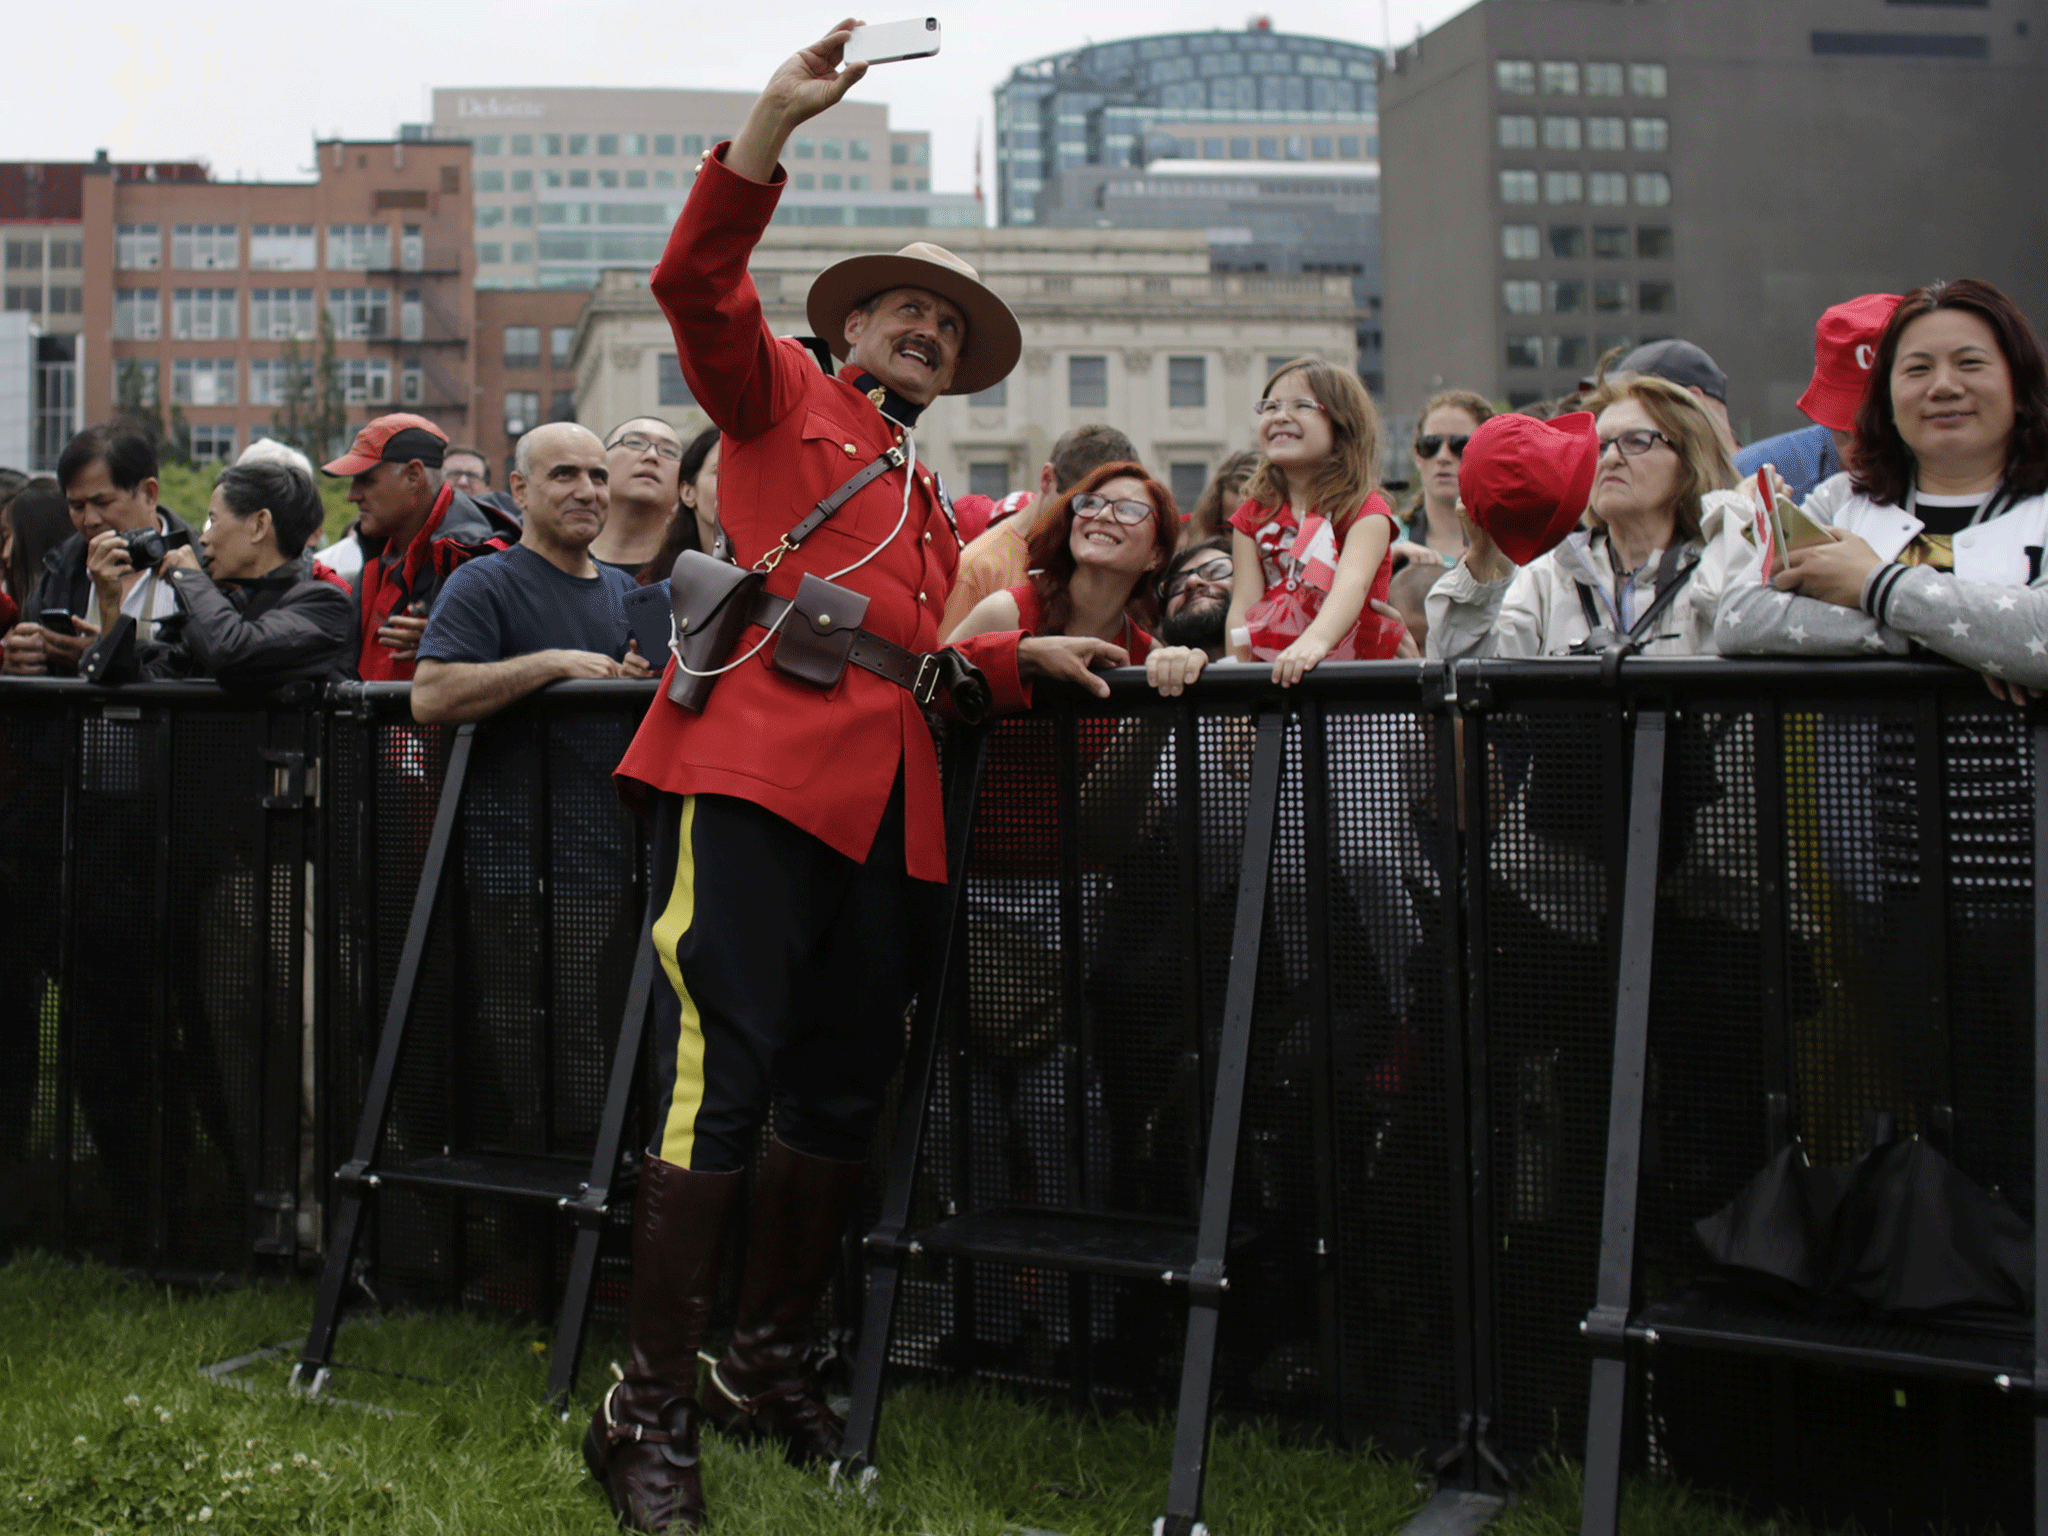 A Royal Canada Mounted Police officer takes a selfie during Canada Day festivities on Parliament Hill on 1 July, 2015